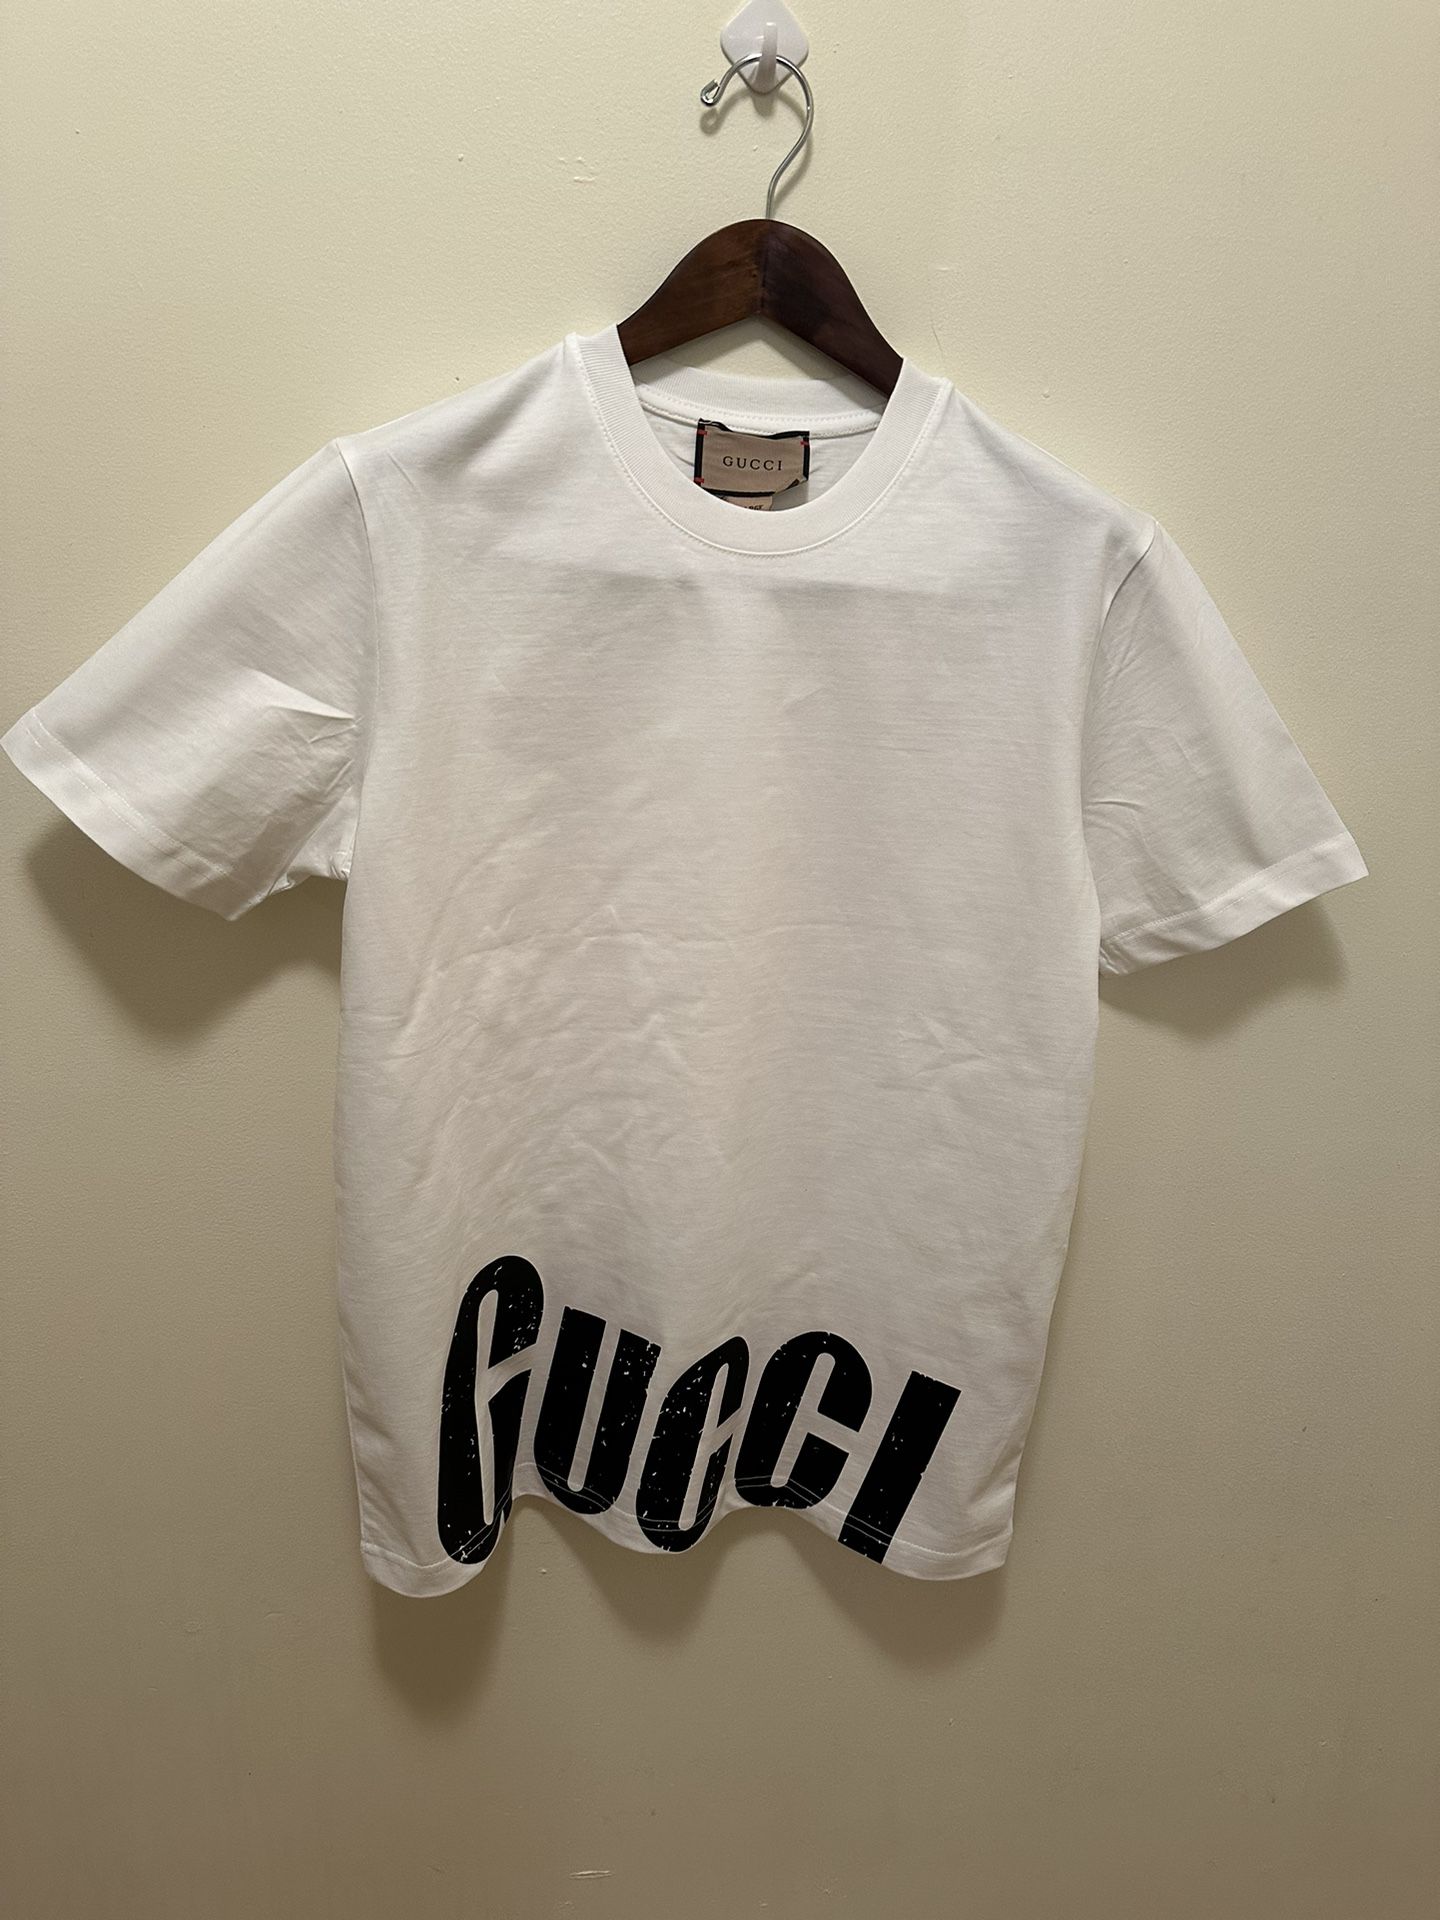 Gucci Men's T-Shirt White&Black Made In Italy 100%Cotton Original 